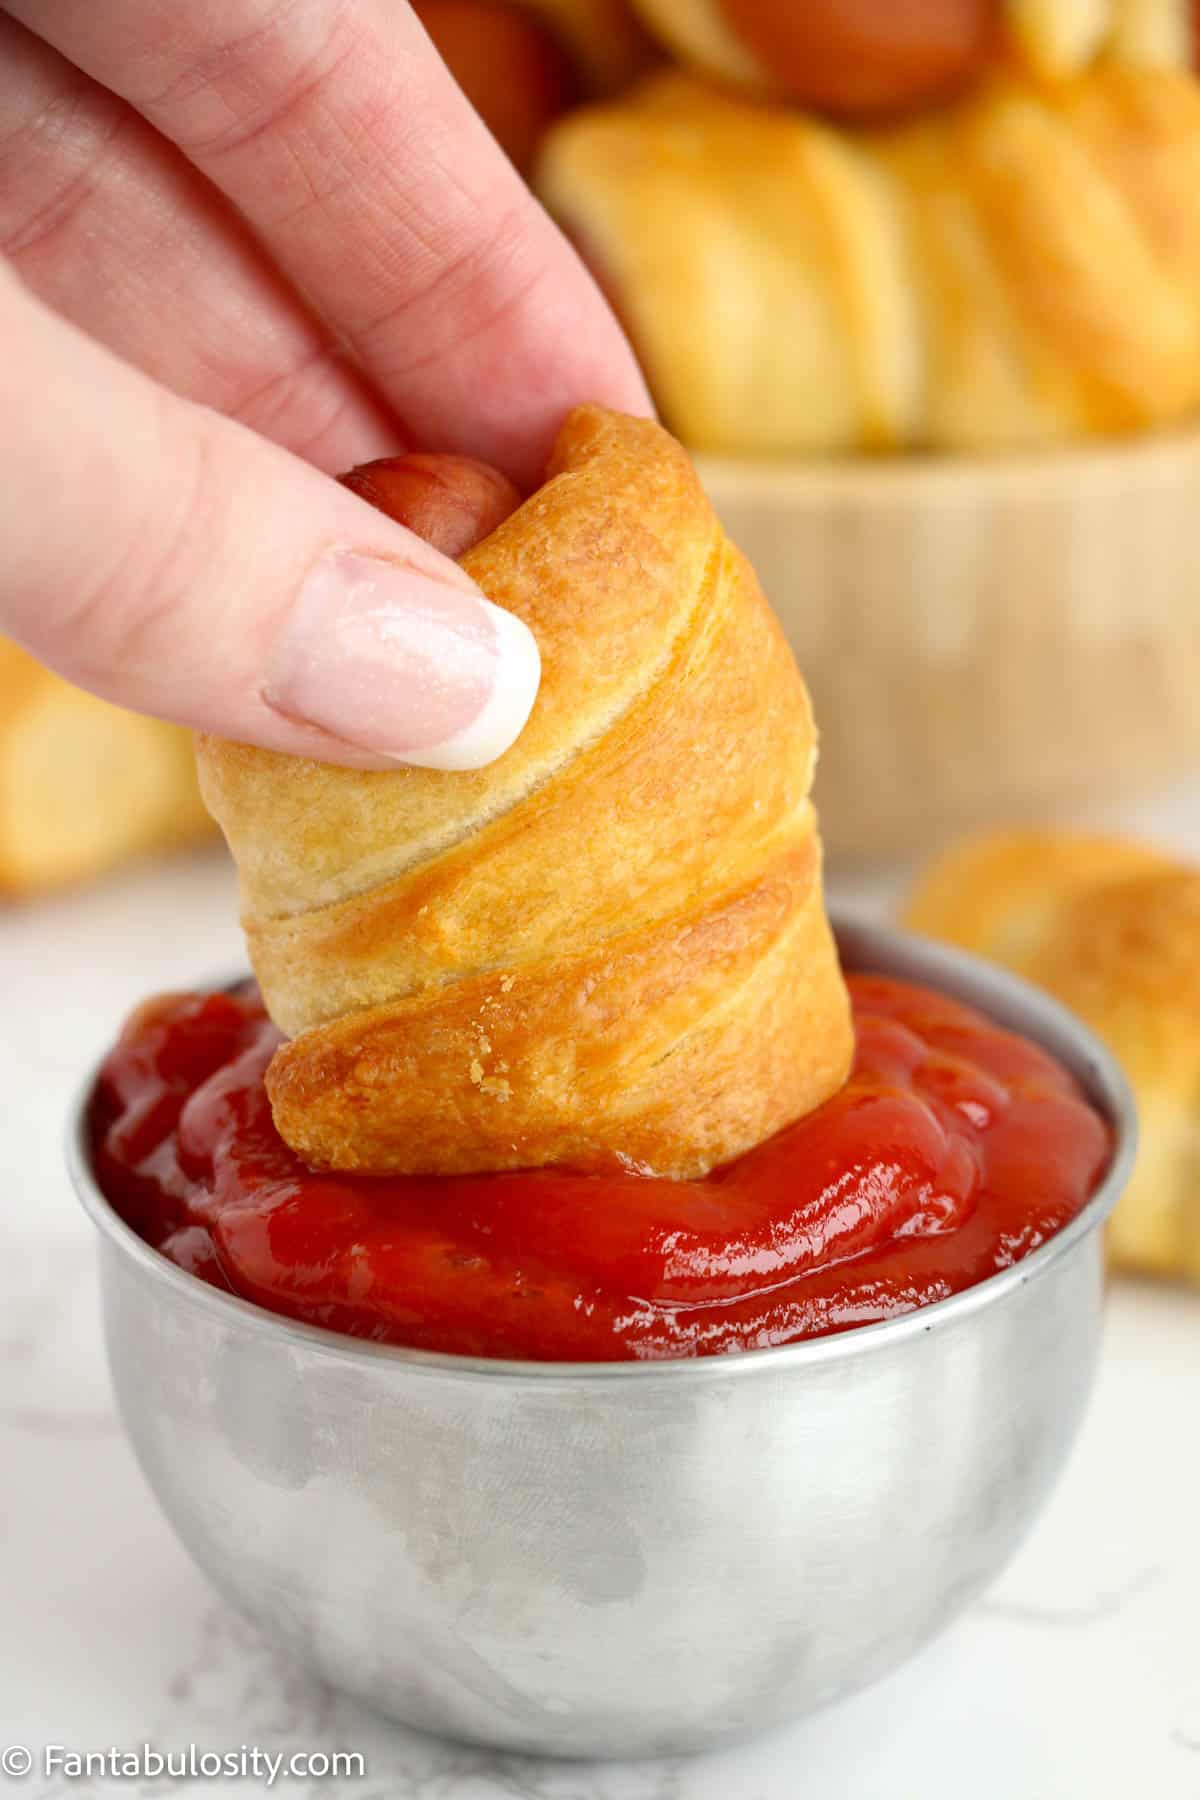 Pigs in a blanket dipped into ketchup.